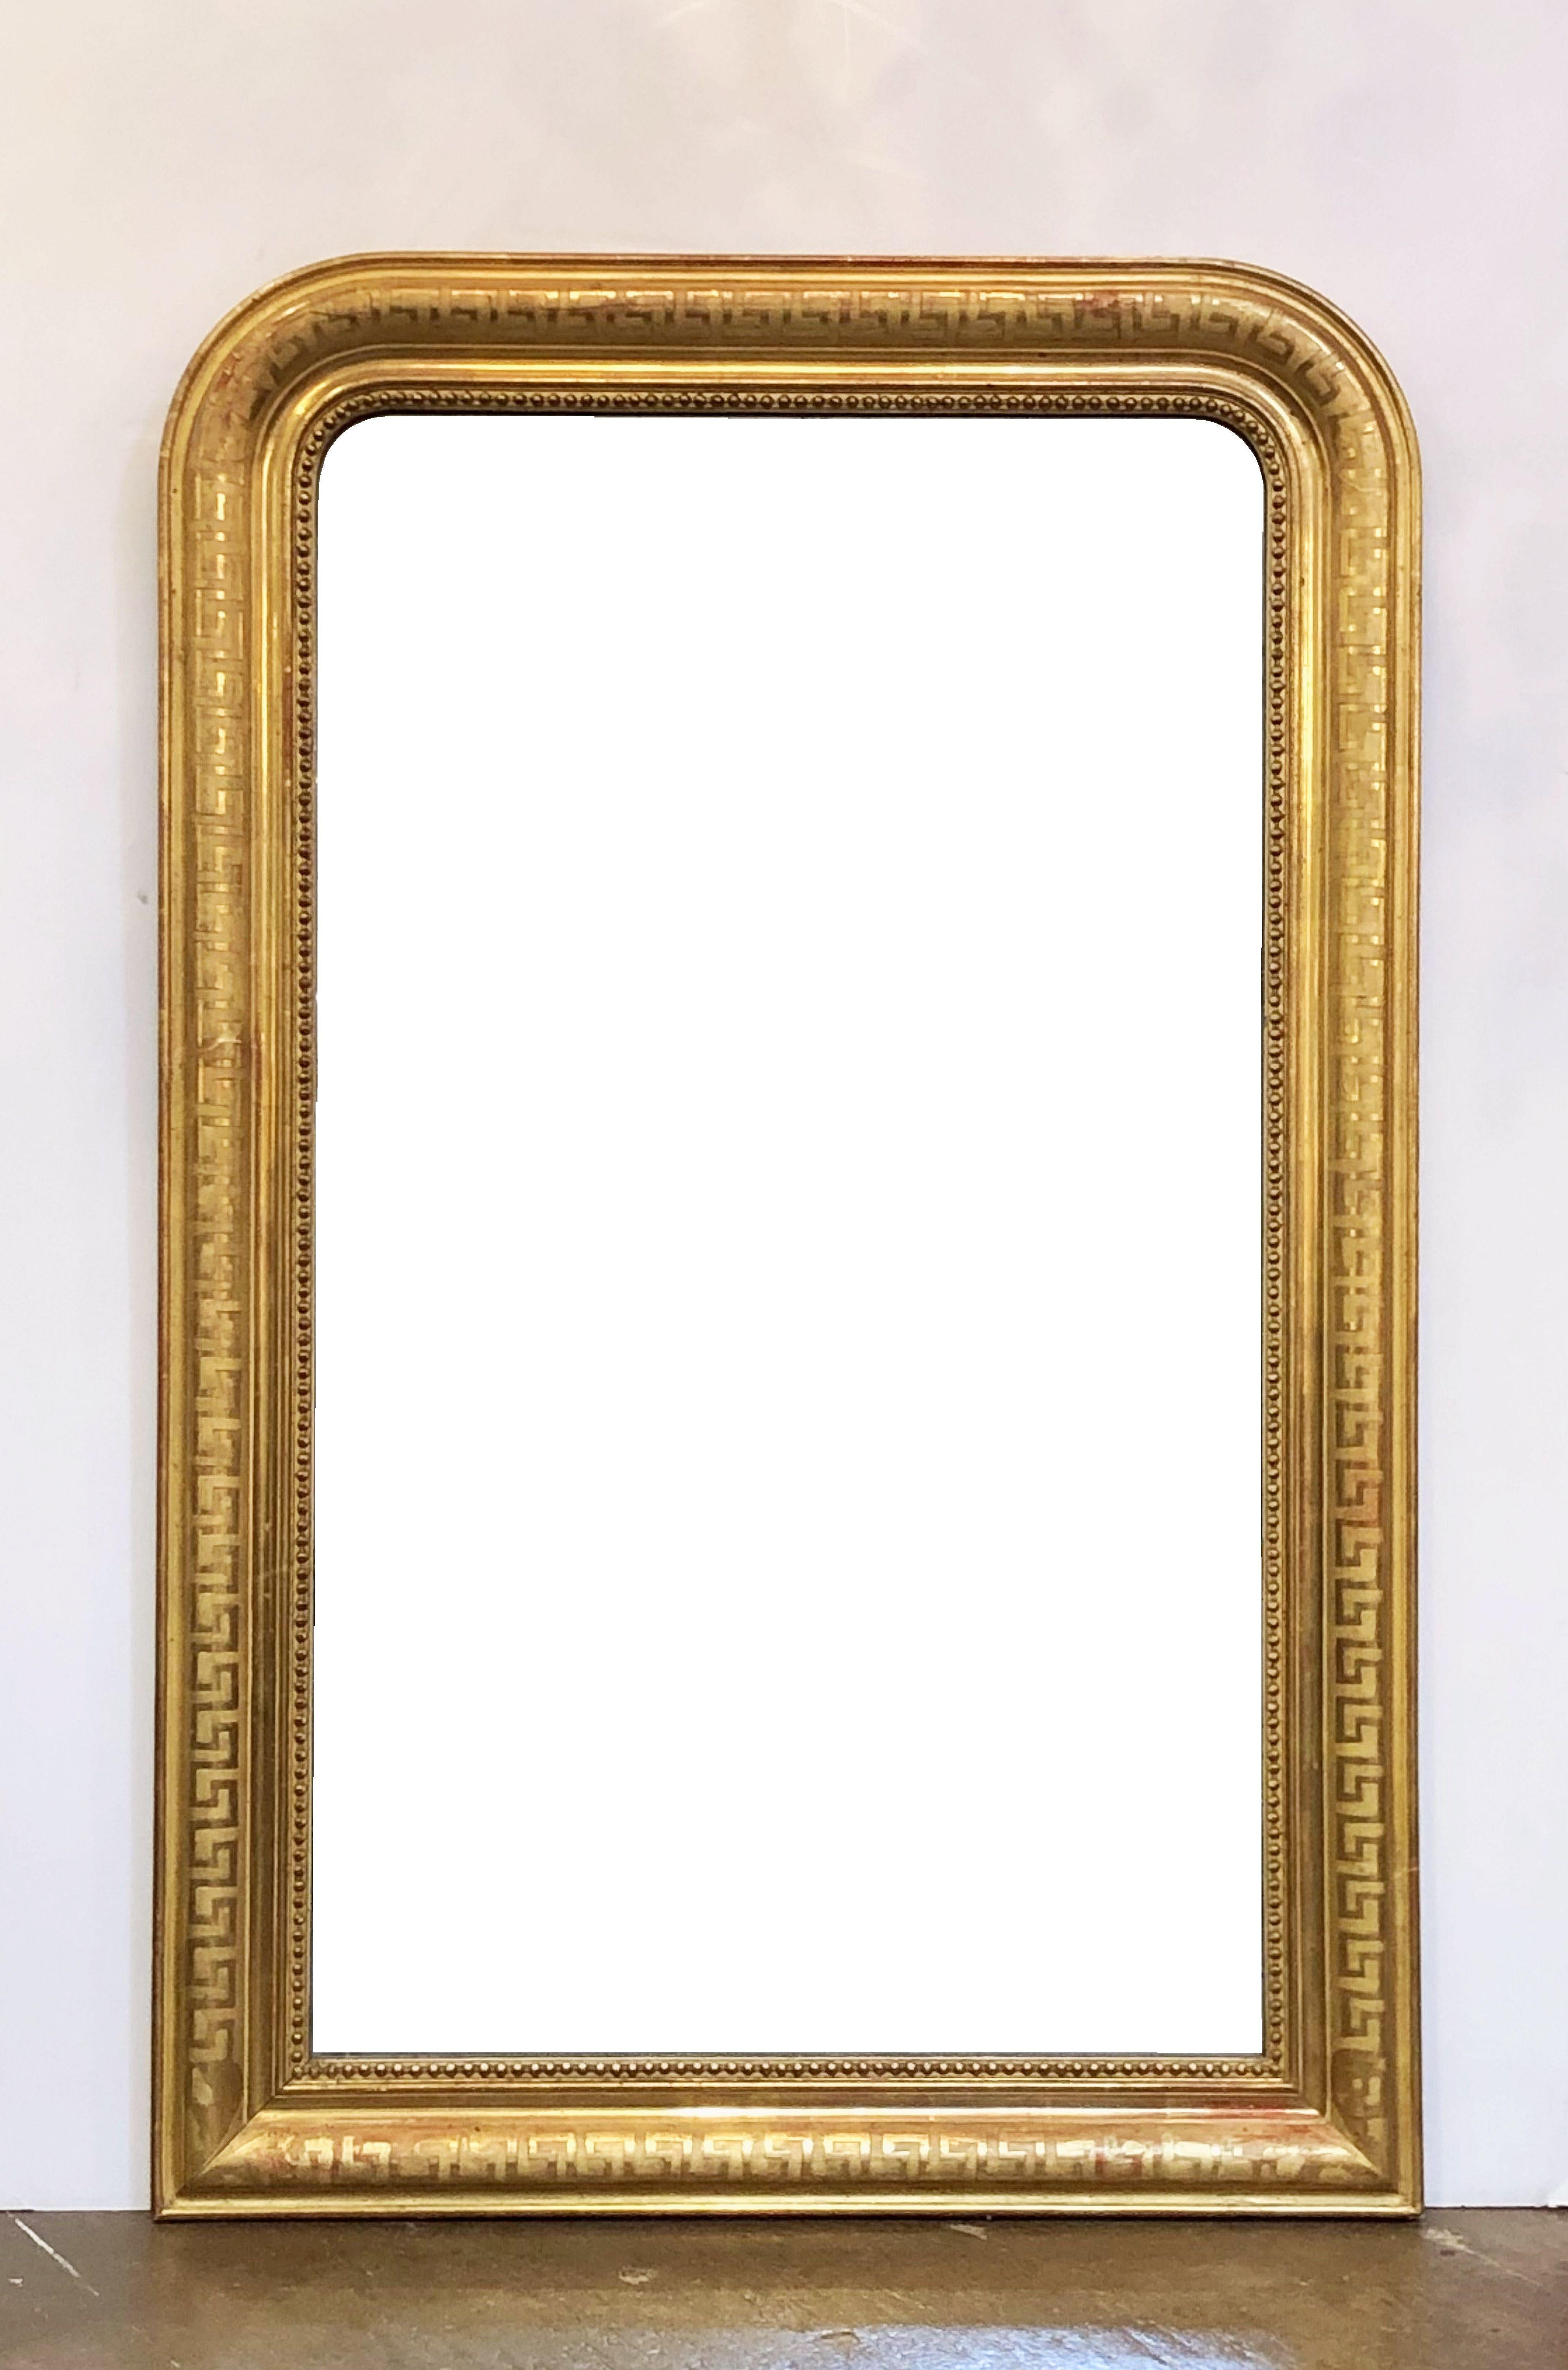 A handsome large Louis Philippe gilt wall mirror from France, featuring a lovely moulded surround and an etched meander or 